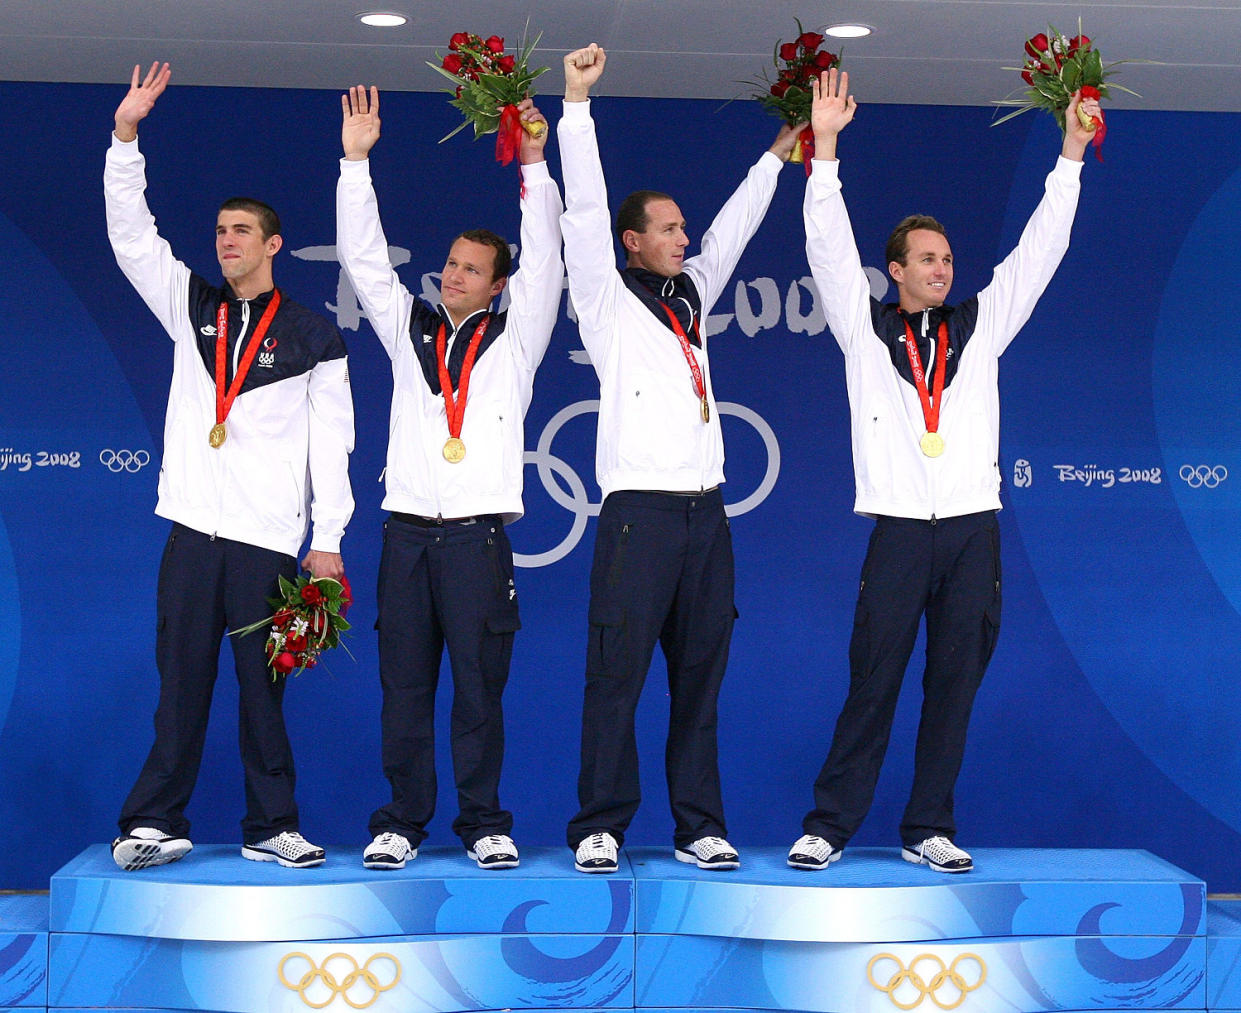 Michael Phelps, Brendan Hansen, Jason Lezak and Aaron Piersol on podium after winning Olympic gold medals in 2008. (Al Bello / Getty Images)